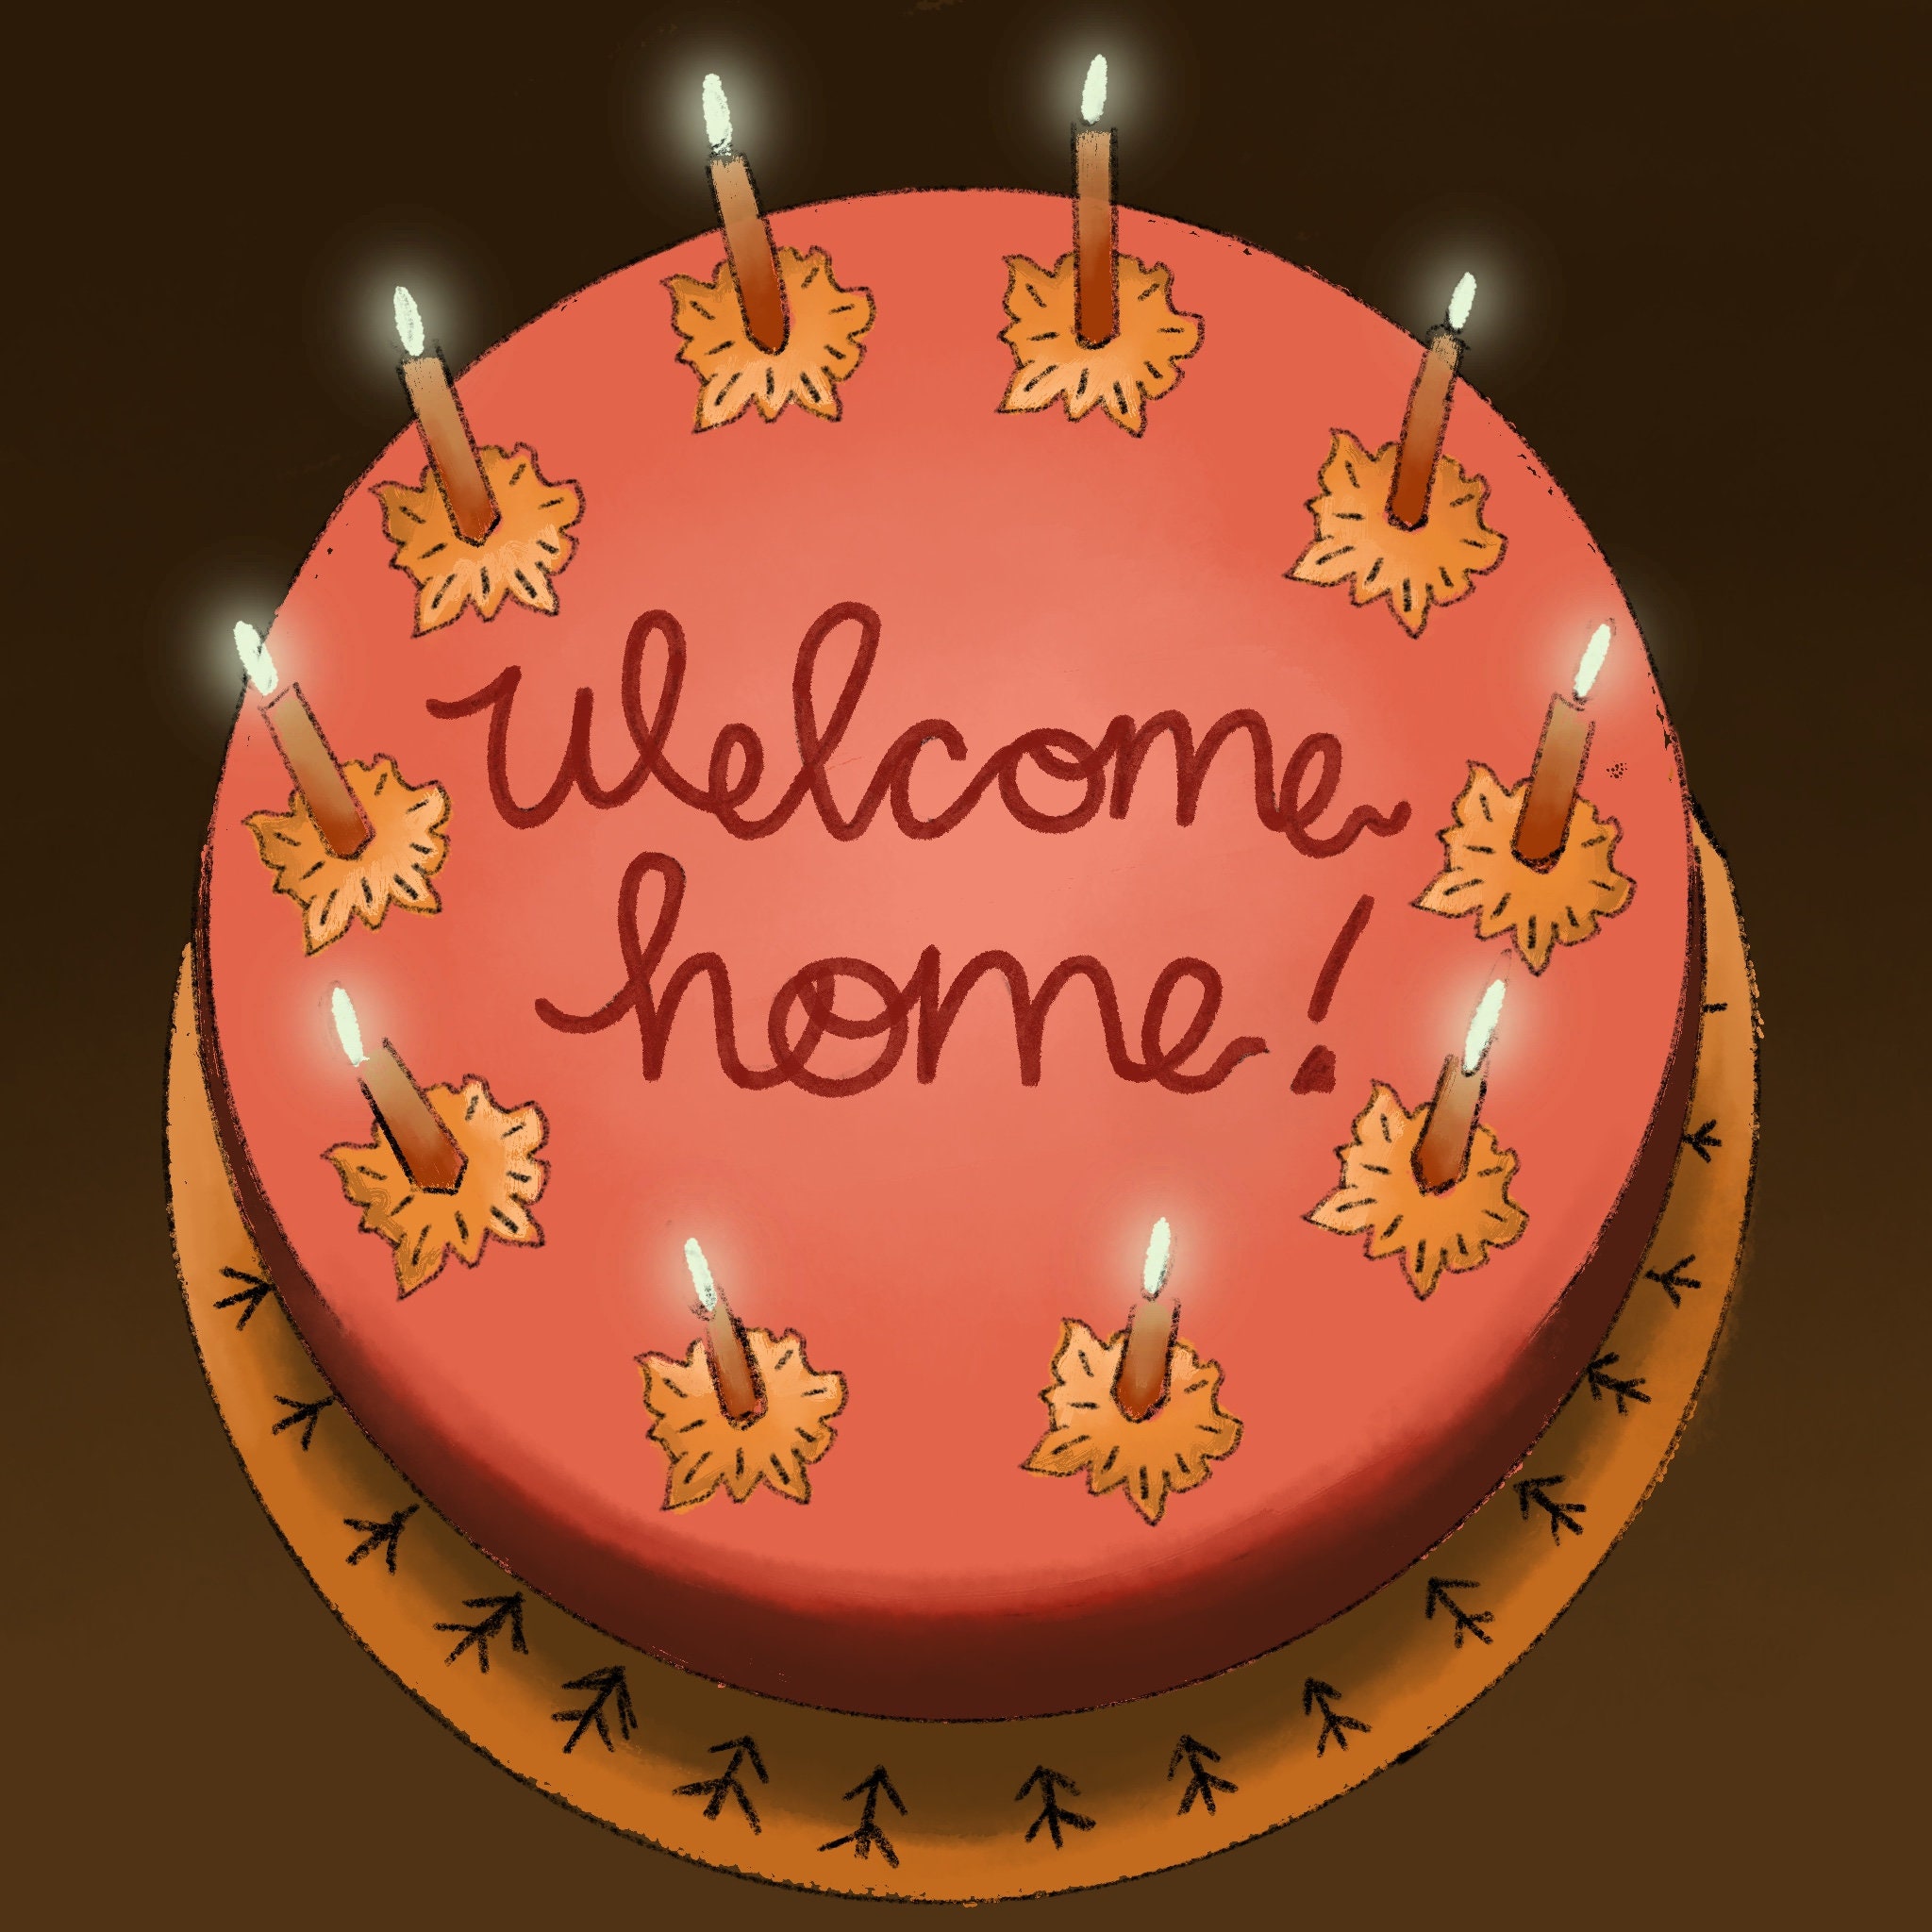 Details more than 57 coraline welcome home cake best - awesomeenglish ...